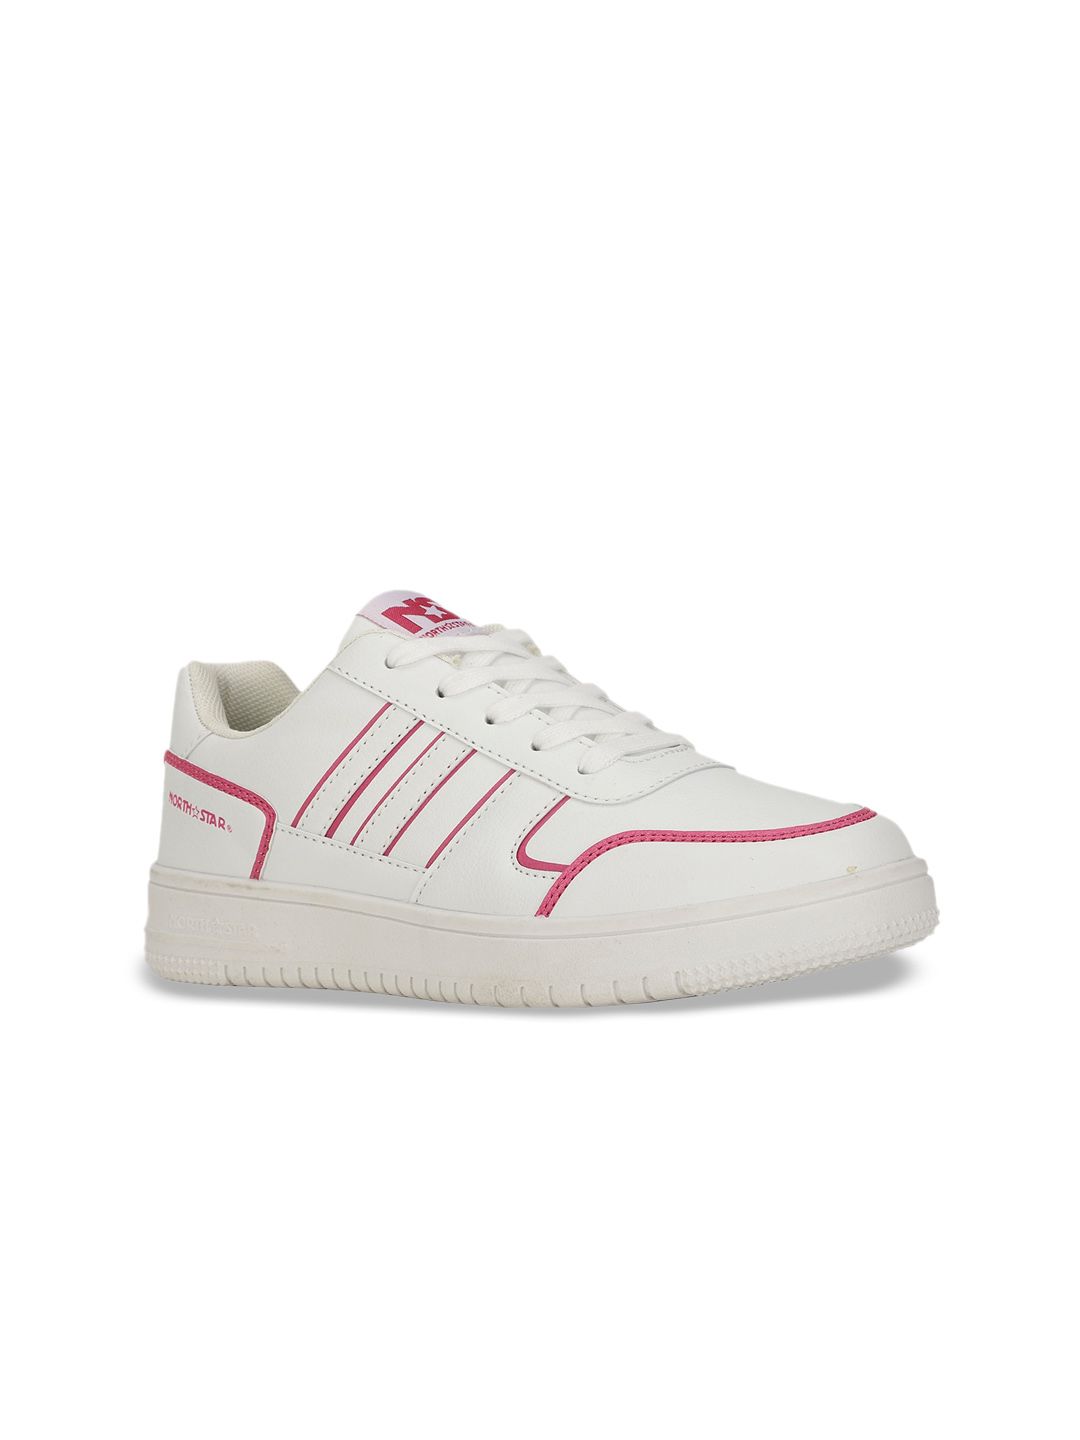 North Star Women Textured PU Sneakers Price in India